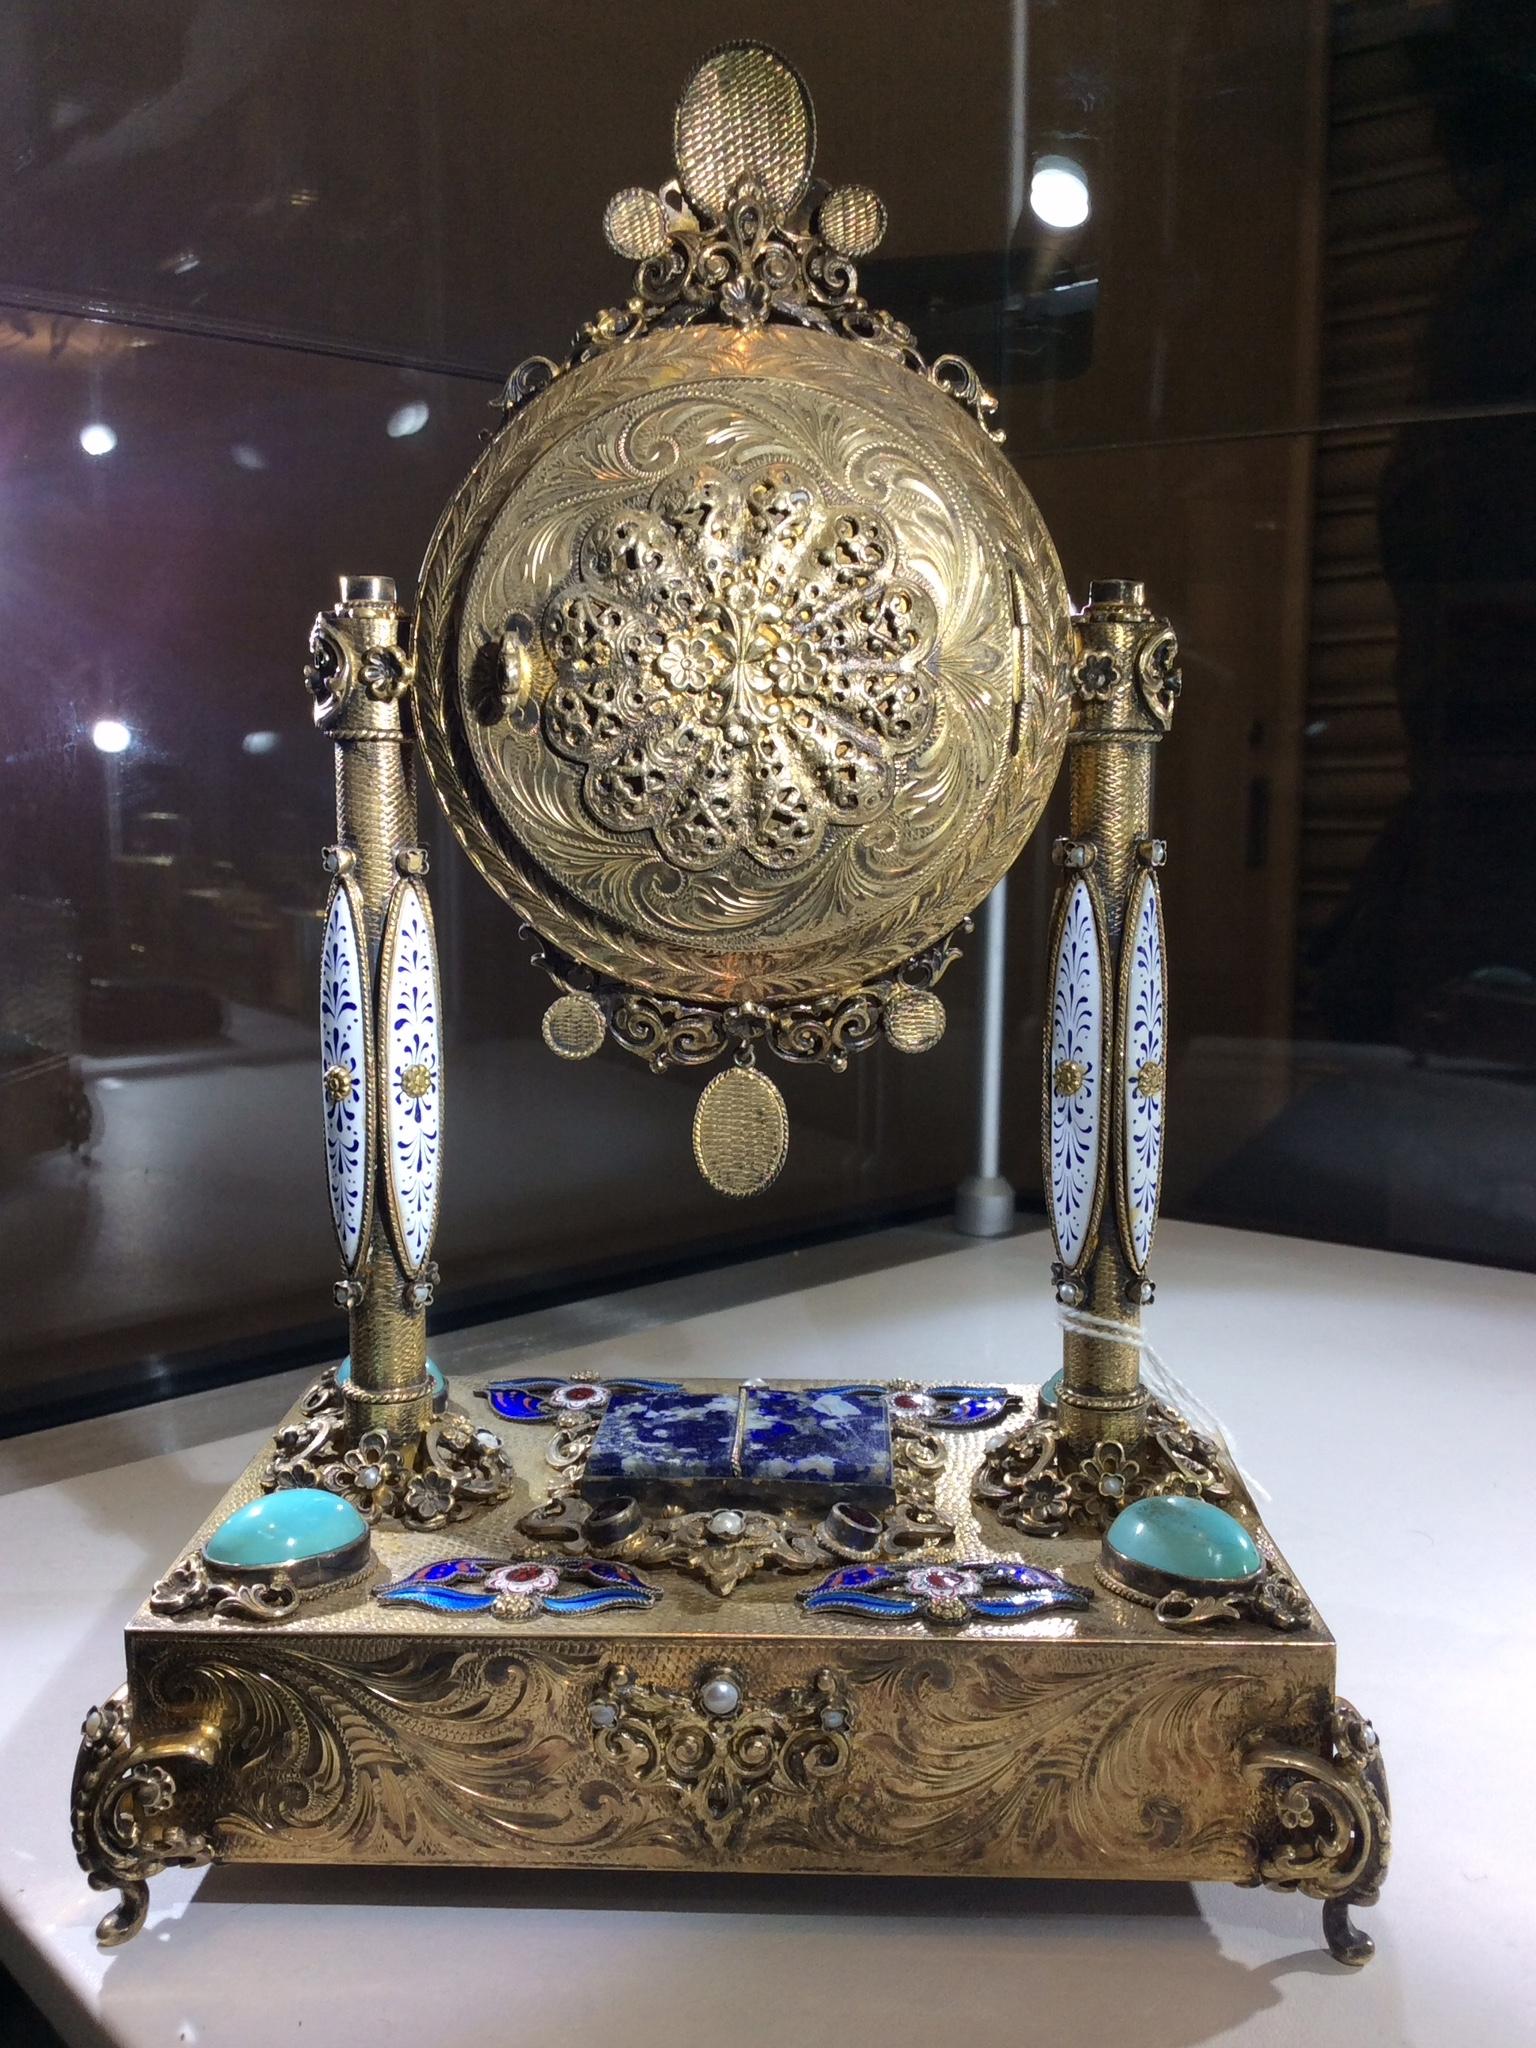 A rare late 19th century Viennese ormolu, silver, enamelled, pearl and semi precious stone mounted musical table clock 

A beautifully handcrafted musical Austrian table clock that was made for the Chinese market. The clock has a solid silver gilt